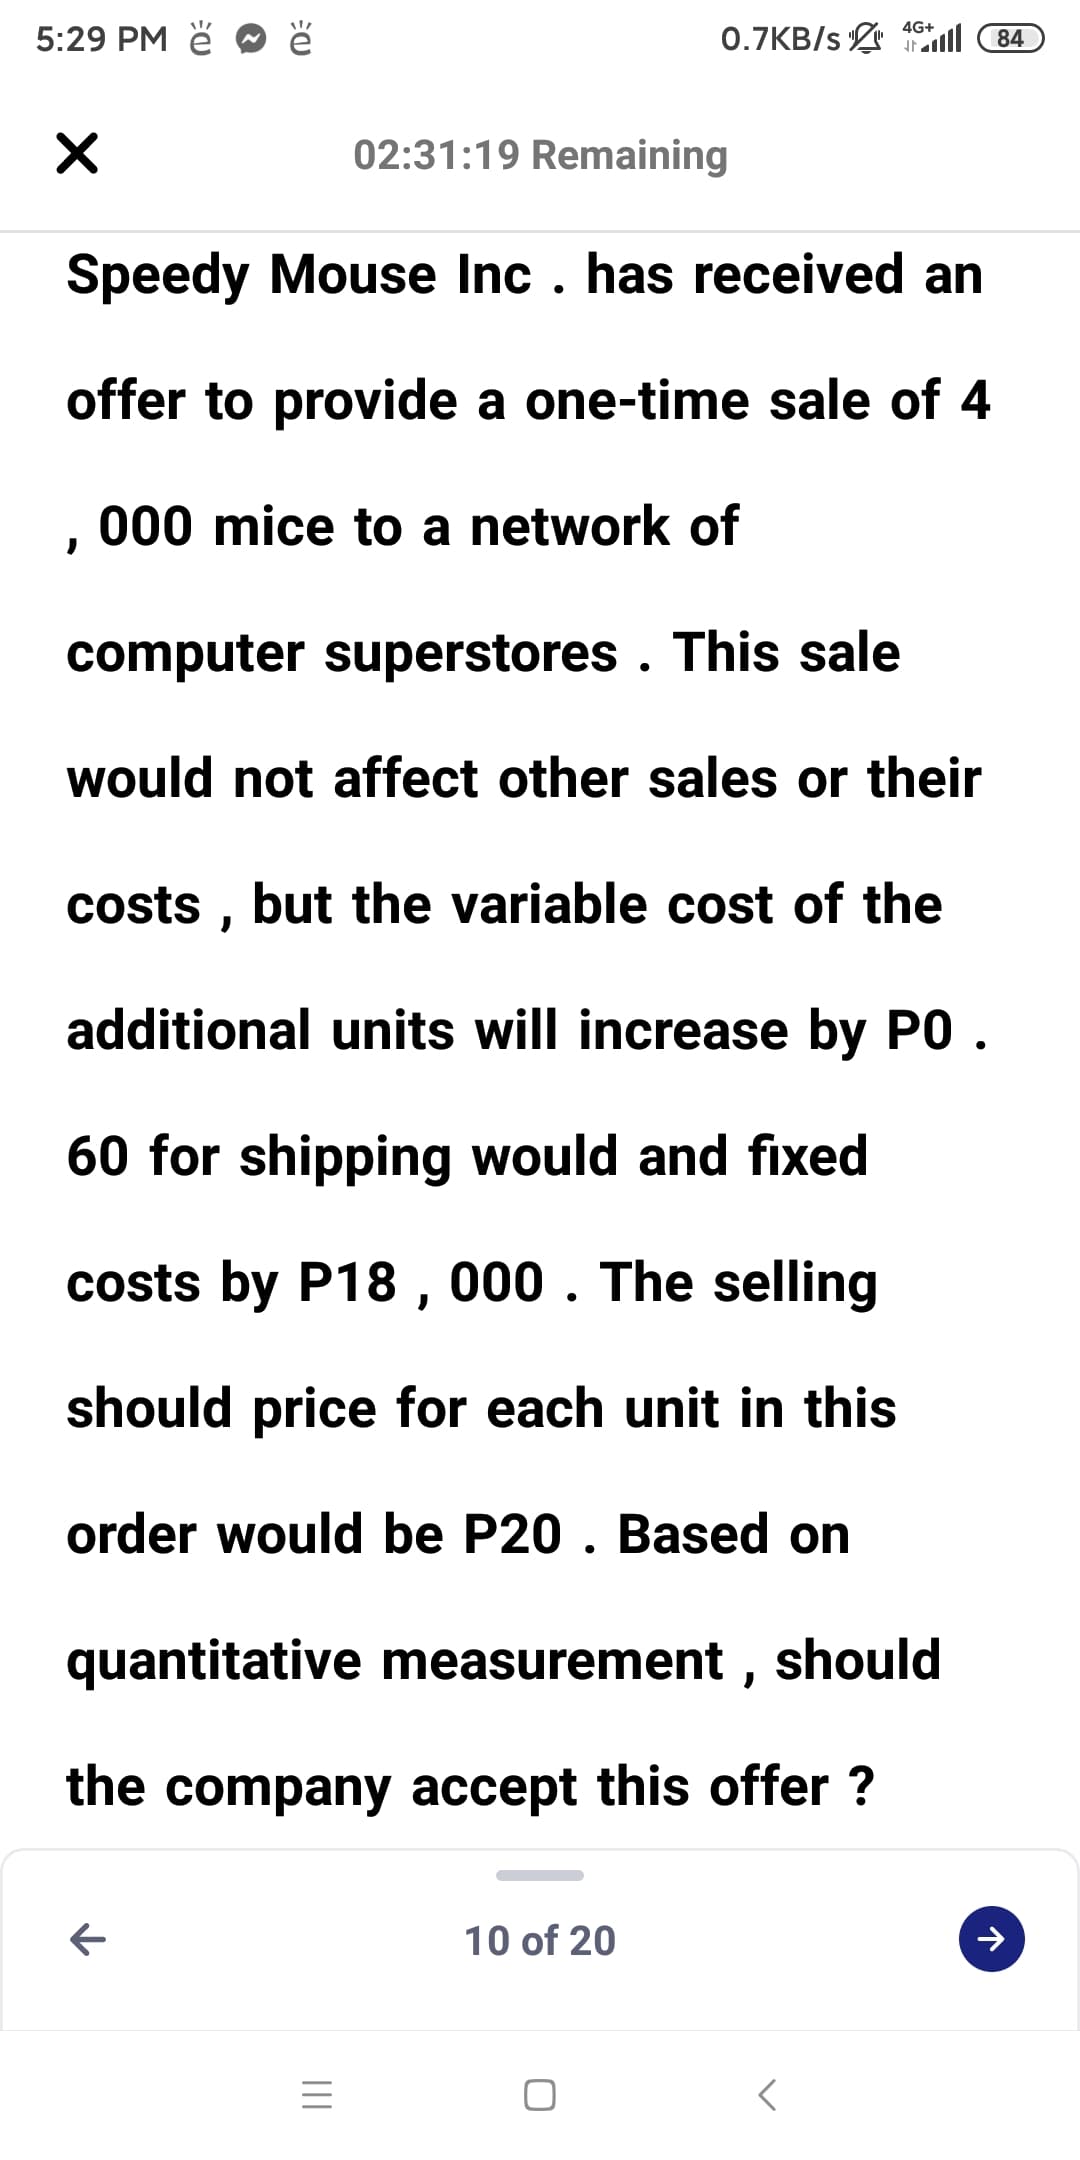 4G+
5:29 PM ě
0.7KB/s l 84
02:31:19 Remaining
Speedy Mouse Inc . has received an
offer to provide a one-time sale of 4
000 mice to a network of
computer superstores . This sale
would not affect other sales or their
costs , but the variable cost of the
additional units will increase by PO .
60 for shipping would and fixed
costs by P18 , 000 . The selling
should price for each unit in this
order would be P20 . Based on
quantitative measurement , should
the company accept this offer ?
10 of 20
